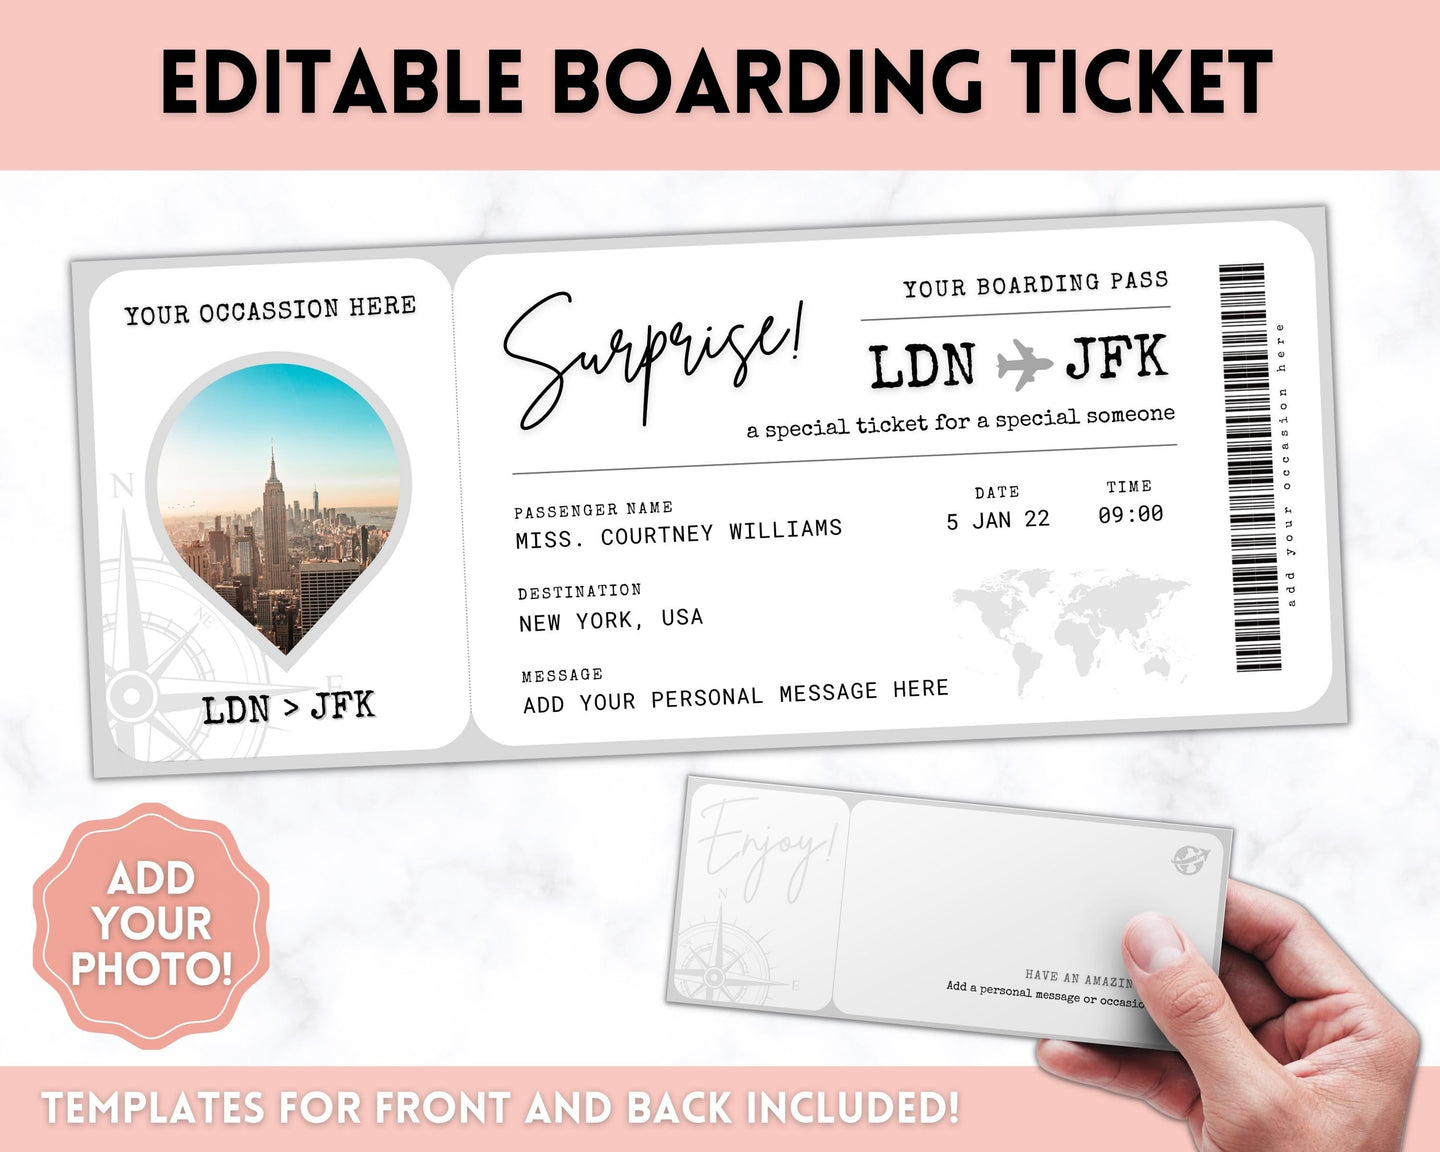 Boarding Pass Template, EDITABLE Boarding Ticket, Surprise Vacation, Plane Ticket, Airline, Trip, Flight Gift, Holiday Destination, Fake,